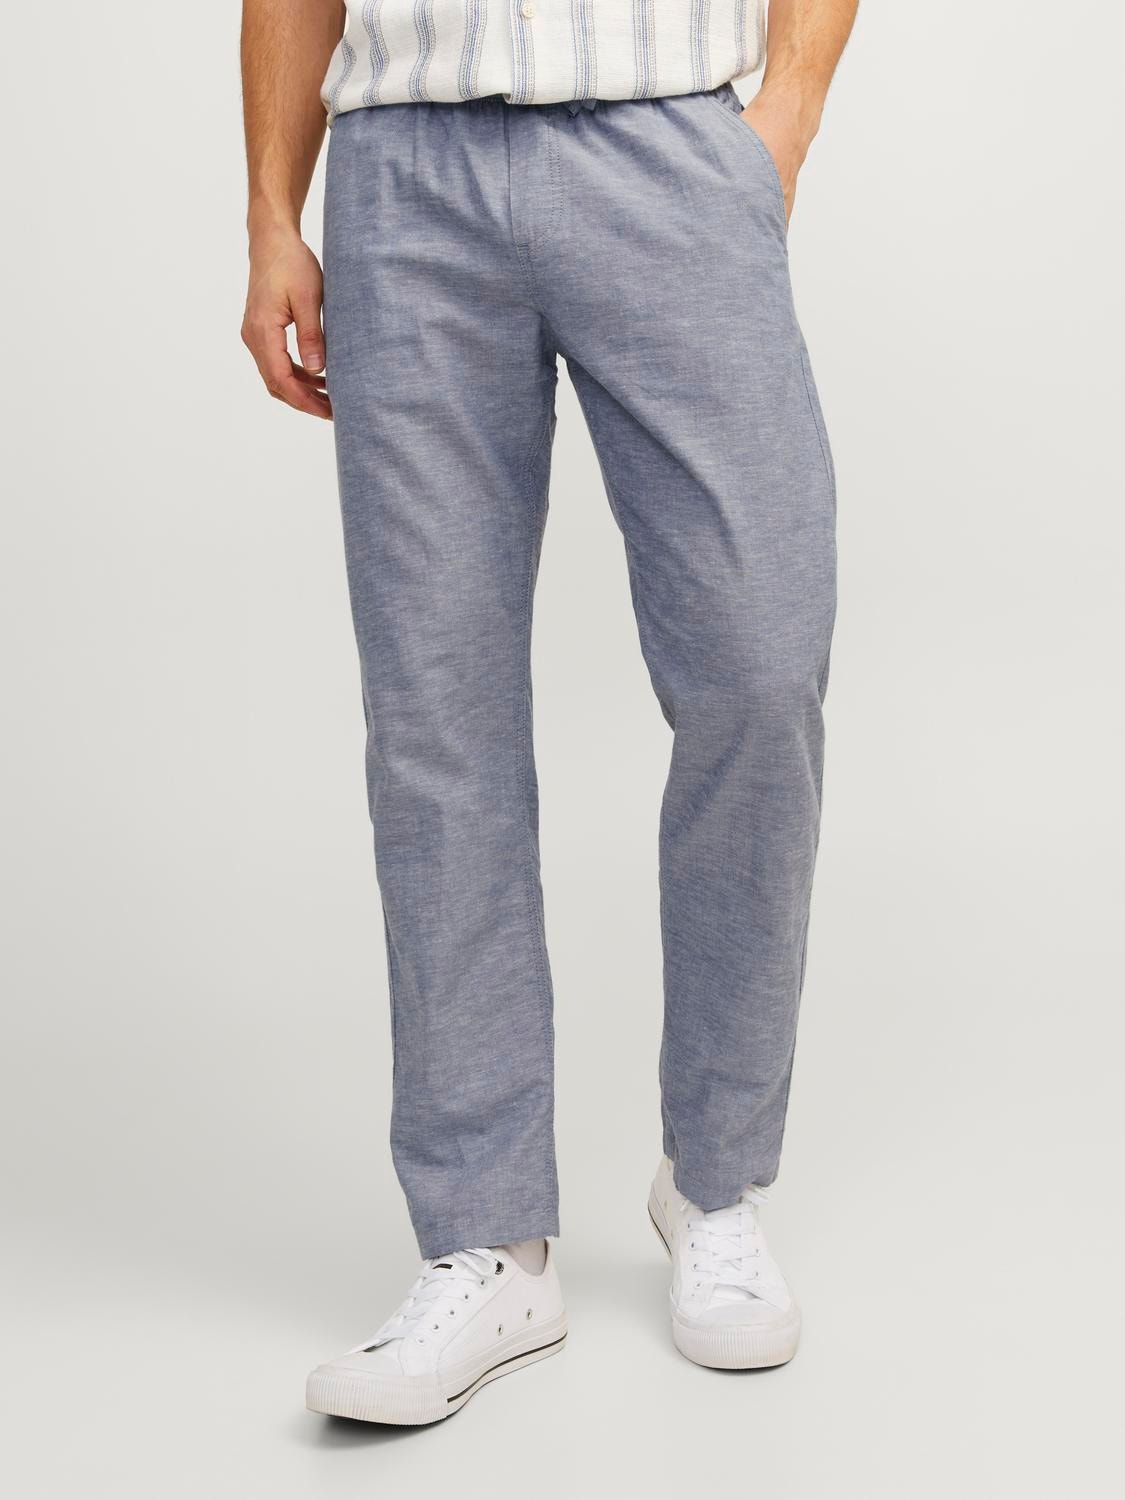 Jack & Jones Relaxed Fit Classic trousers -Faded Denim - 12248606